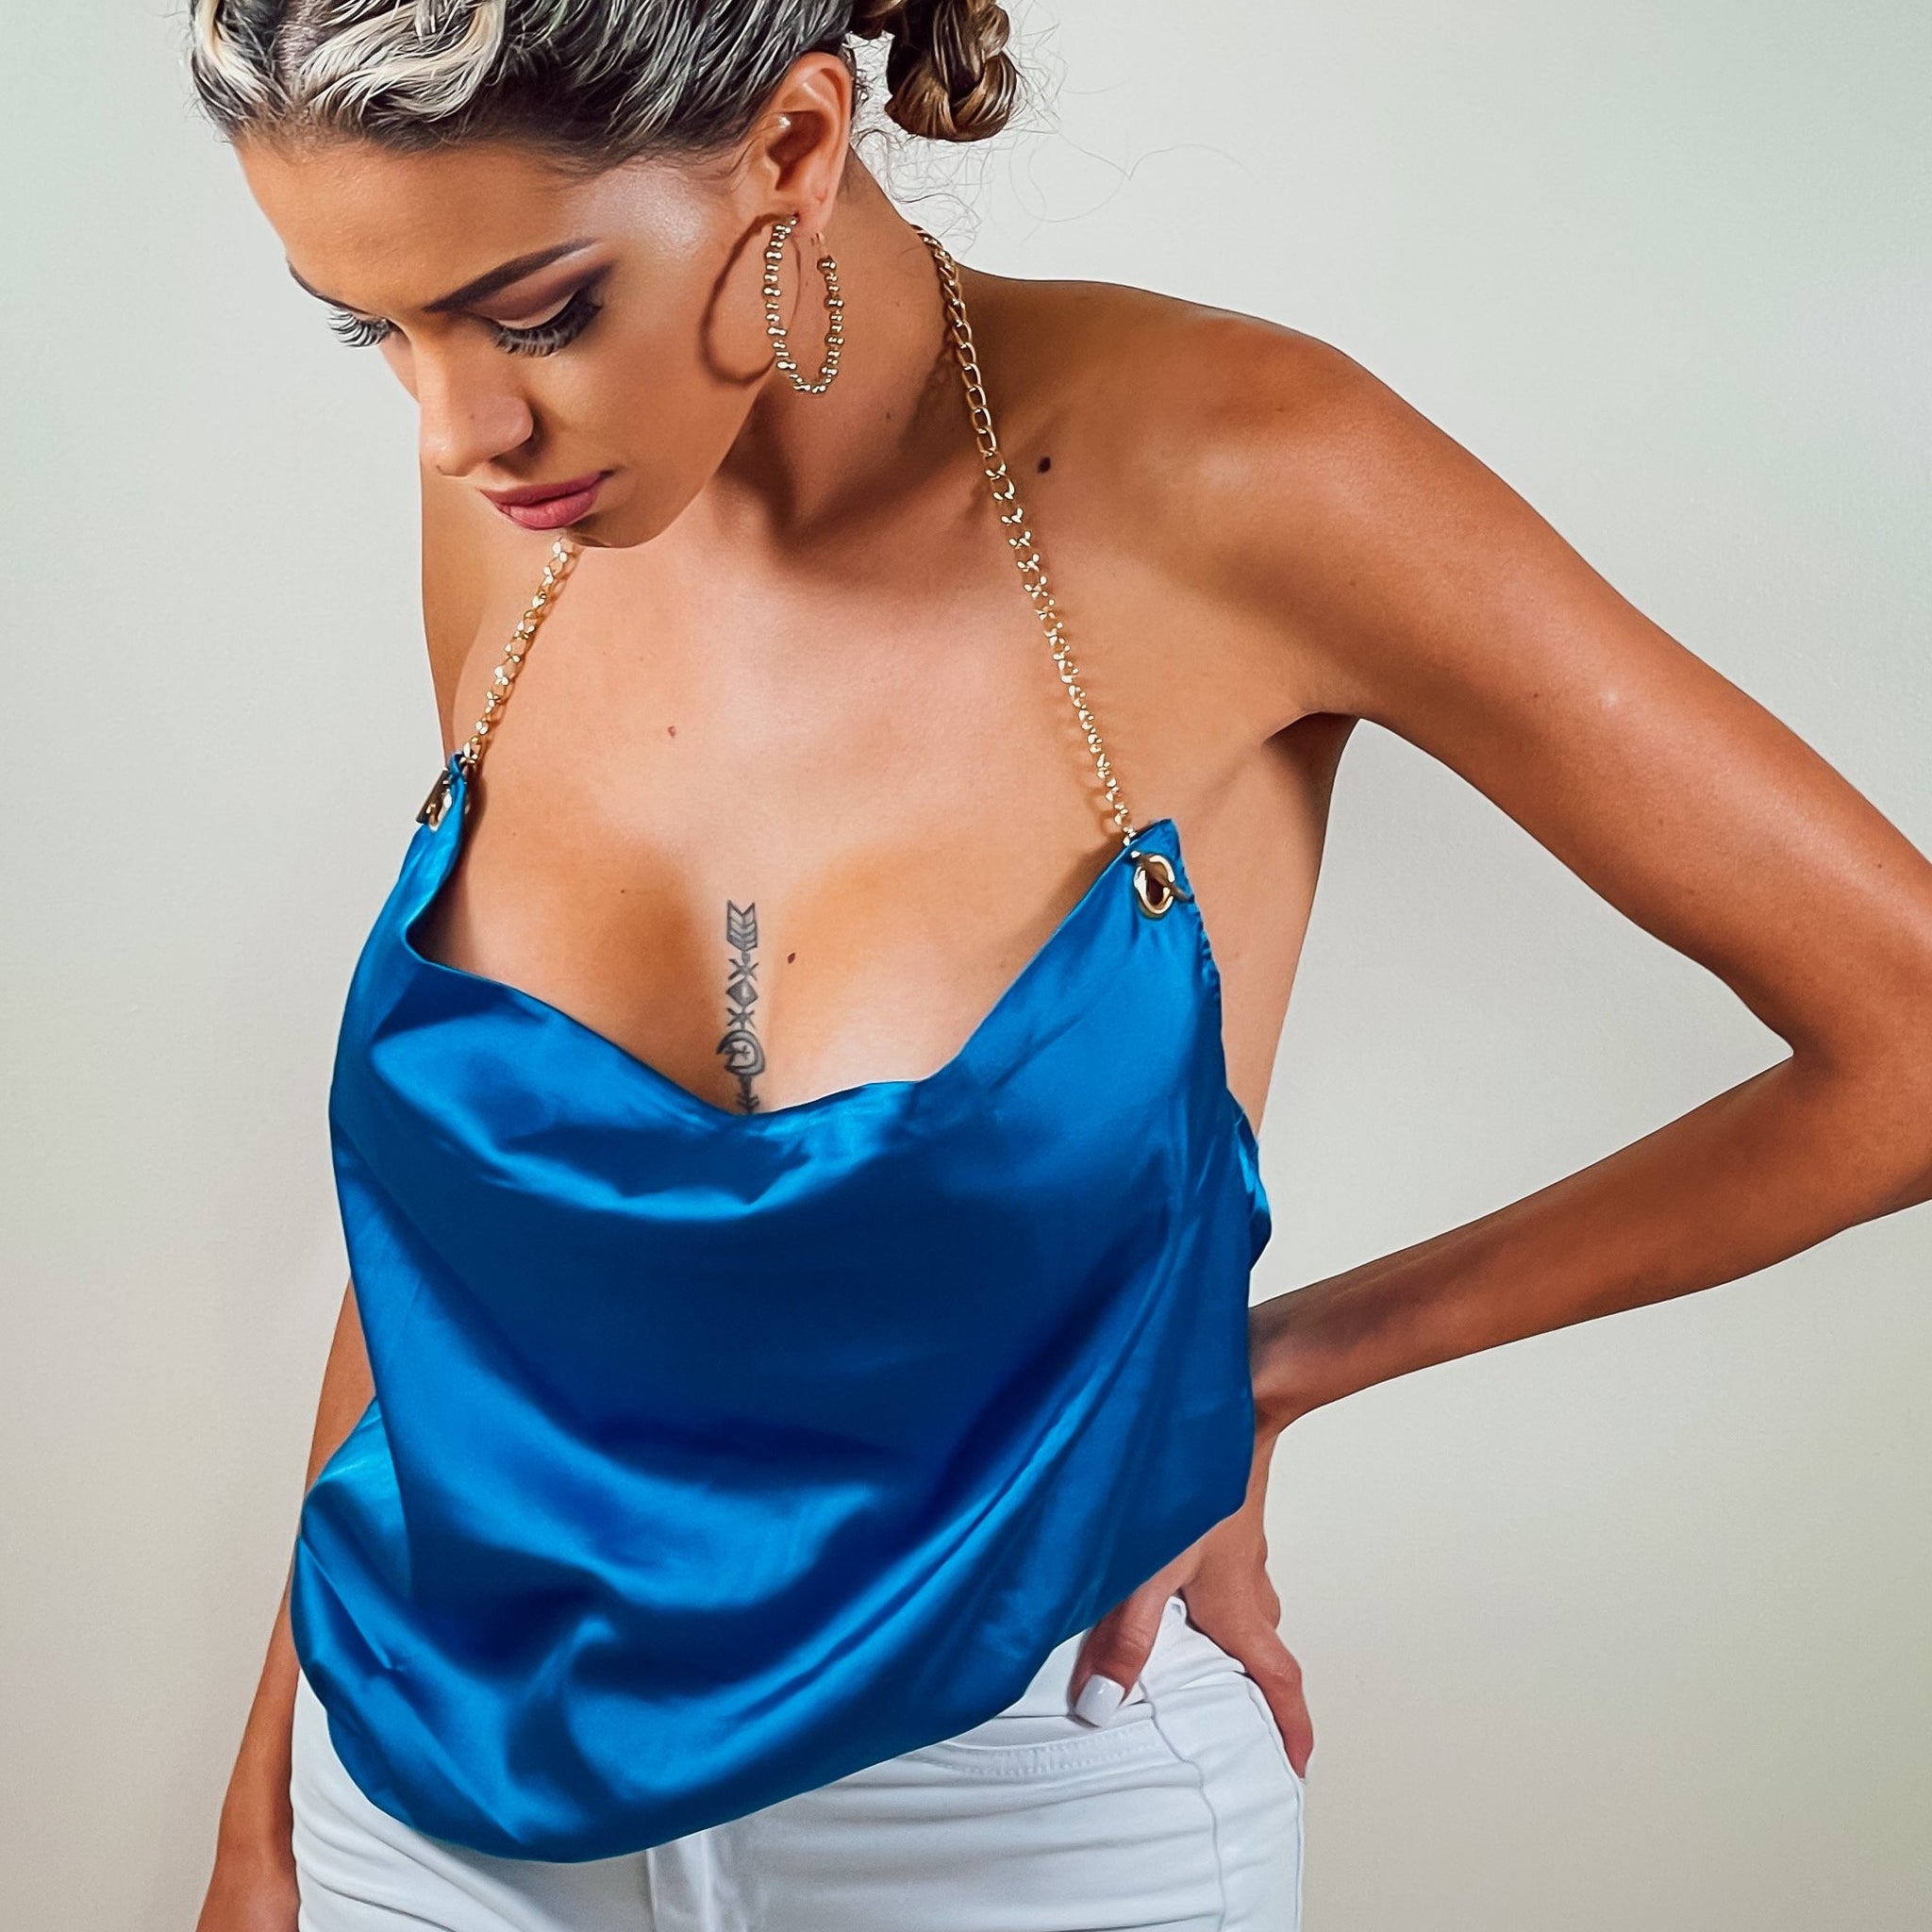 Melody's Chains Satin Party Top Black Blue